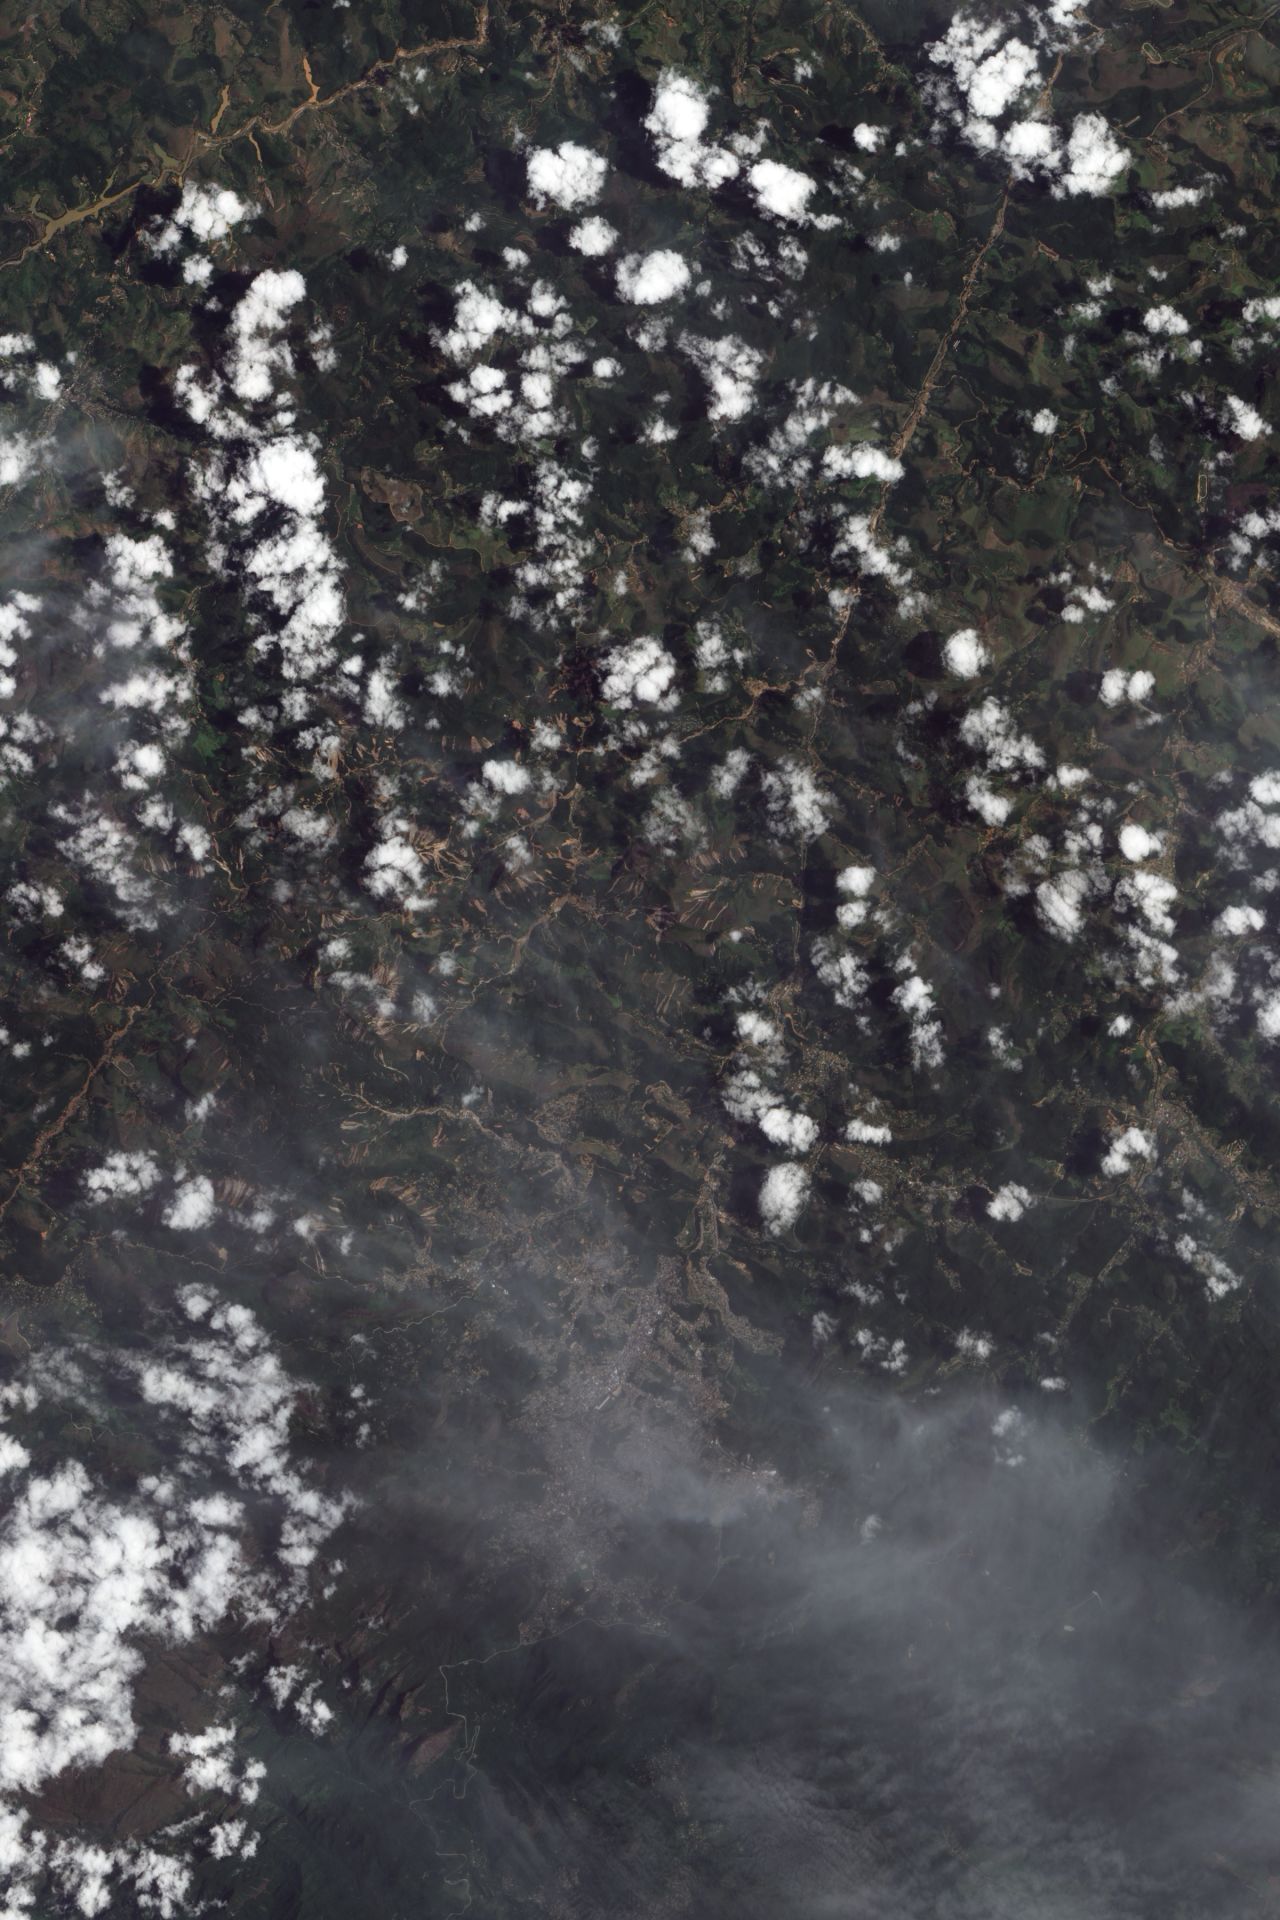 The tiny streaks of brown in this NASA image are in many instances giant <a href="http://edition.cnn.com/2011/WORLD/americas/01/18/brazil.flooding/index.html">landslides</a> which resulted from flash floods in mountainous terrain 60 kilometers north of Rio de Janeiro in January. They caused at least 900 deaths making it one of the worst natural disasters in Brazil's history, according to the World Meteorological Organization (WMO). 